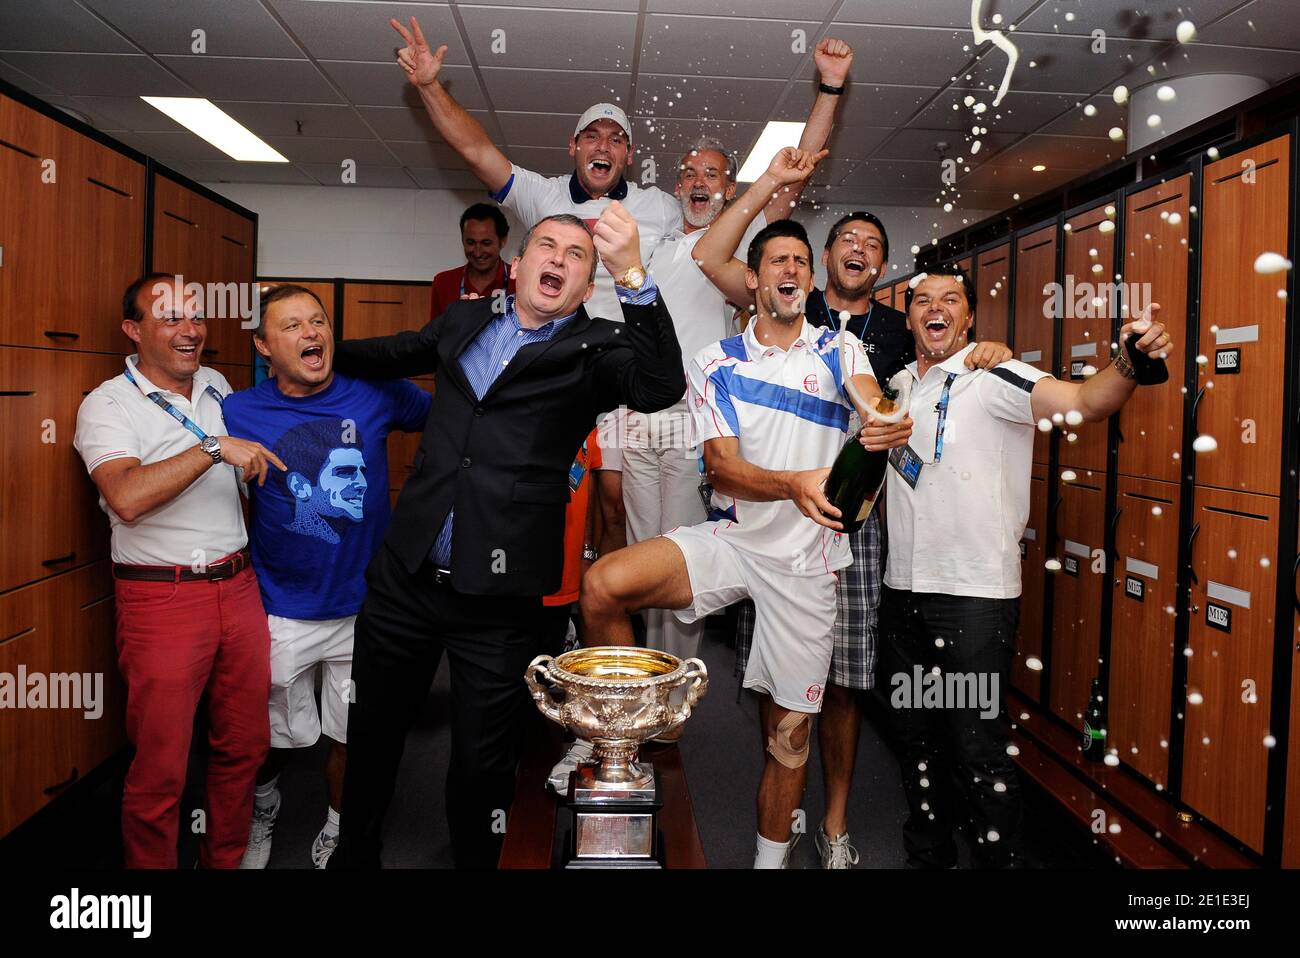 Serbia's Novak Djokovic celebrates with his trophy after defeating Great Britain's Andy Murray 6-4, 6-2, 6-3, during Men's Australian Open tennis tournament in Melbourne, Australia on January 30, 2011. Photo by Ben Solomon/ABACAPRESS.COM Stock Photo